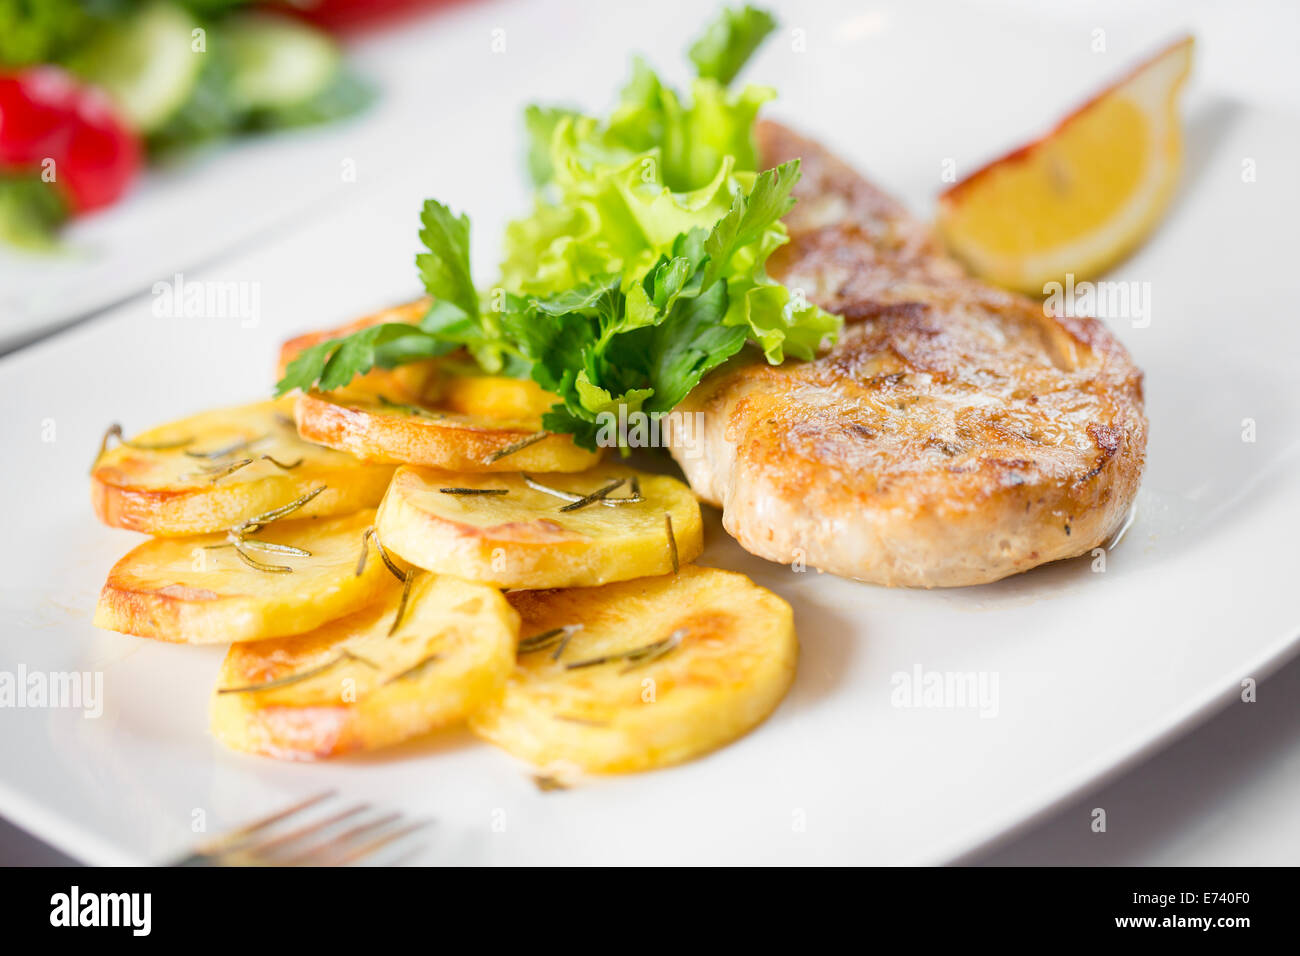 Roasted pork chop with potatoes on dish Stock Photo